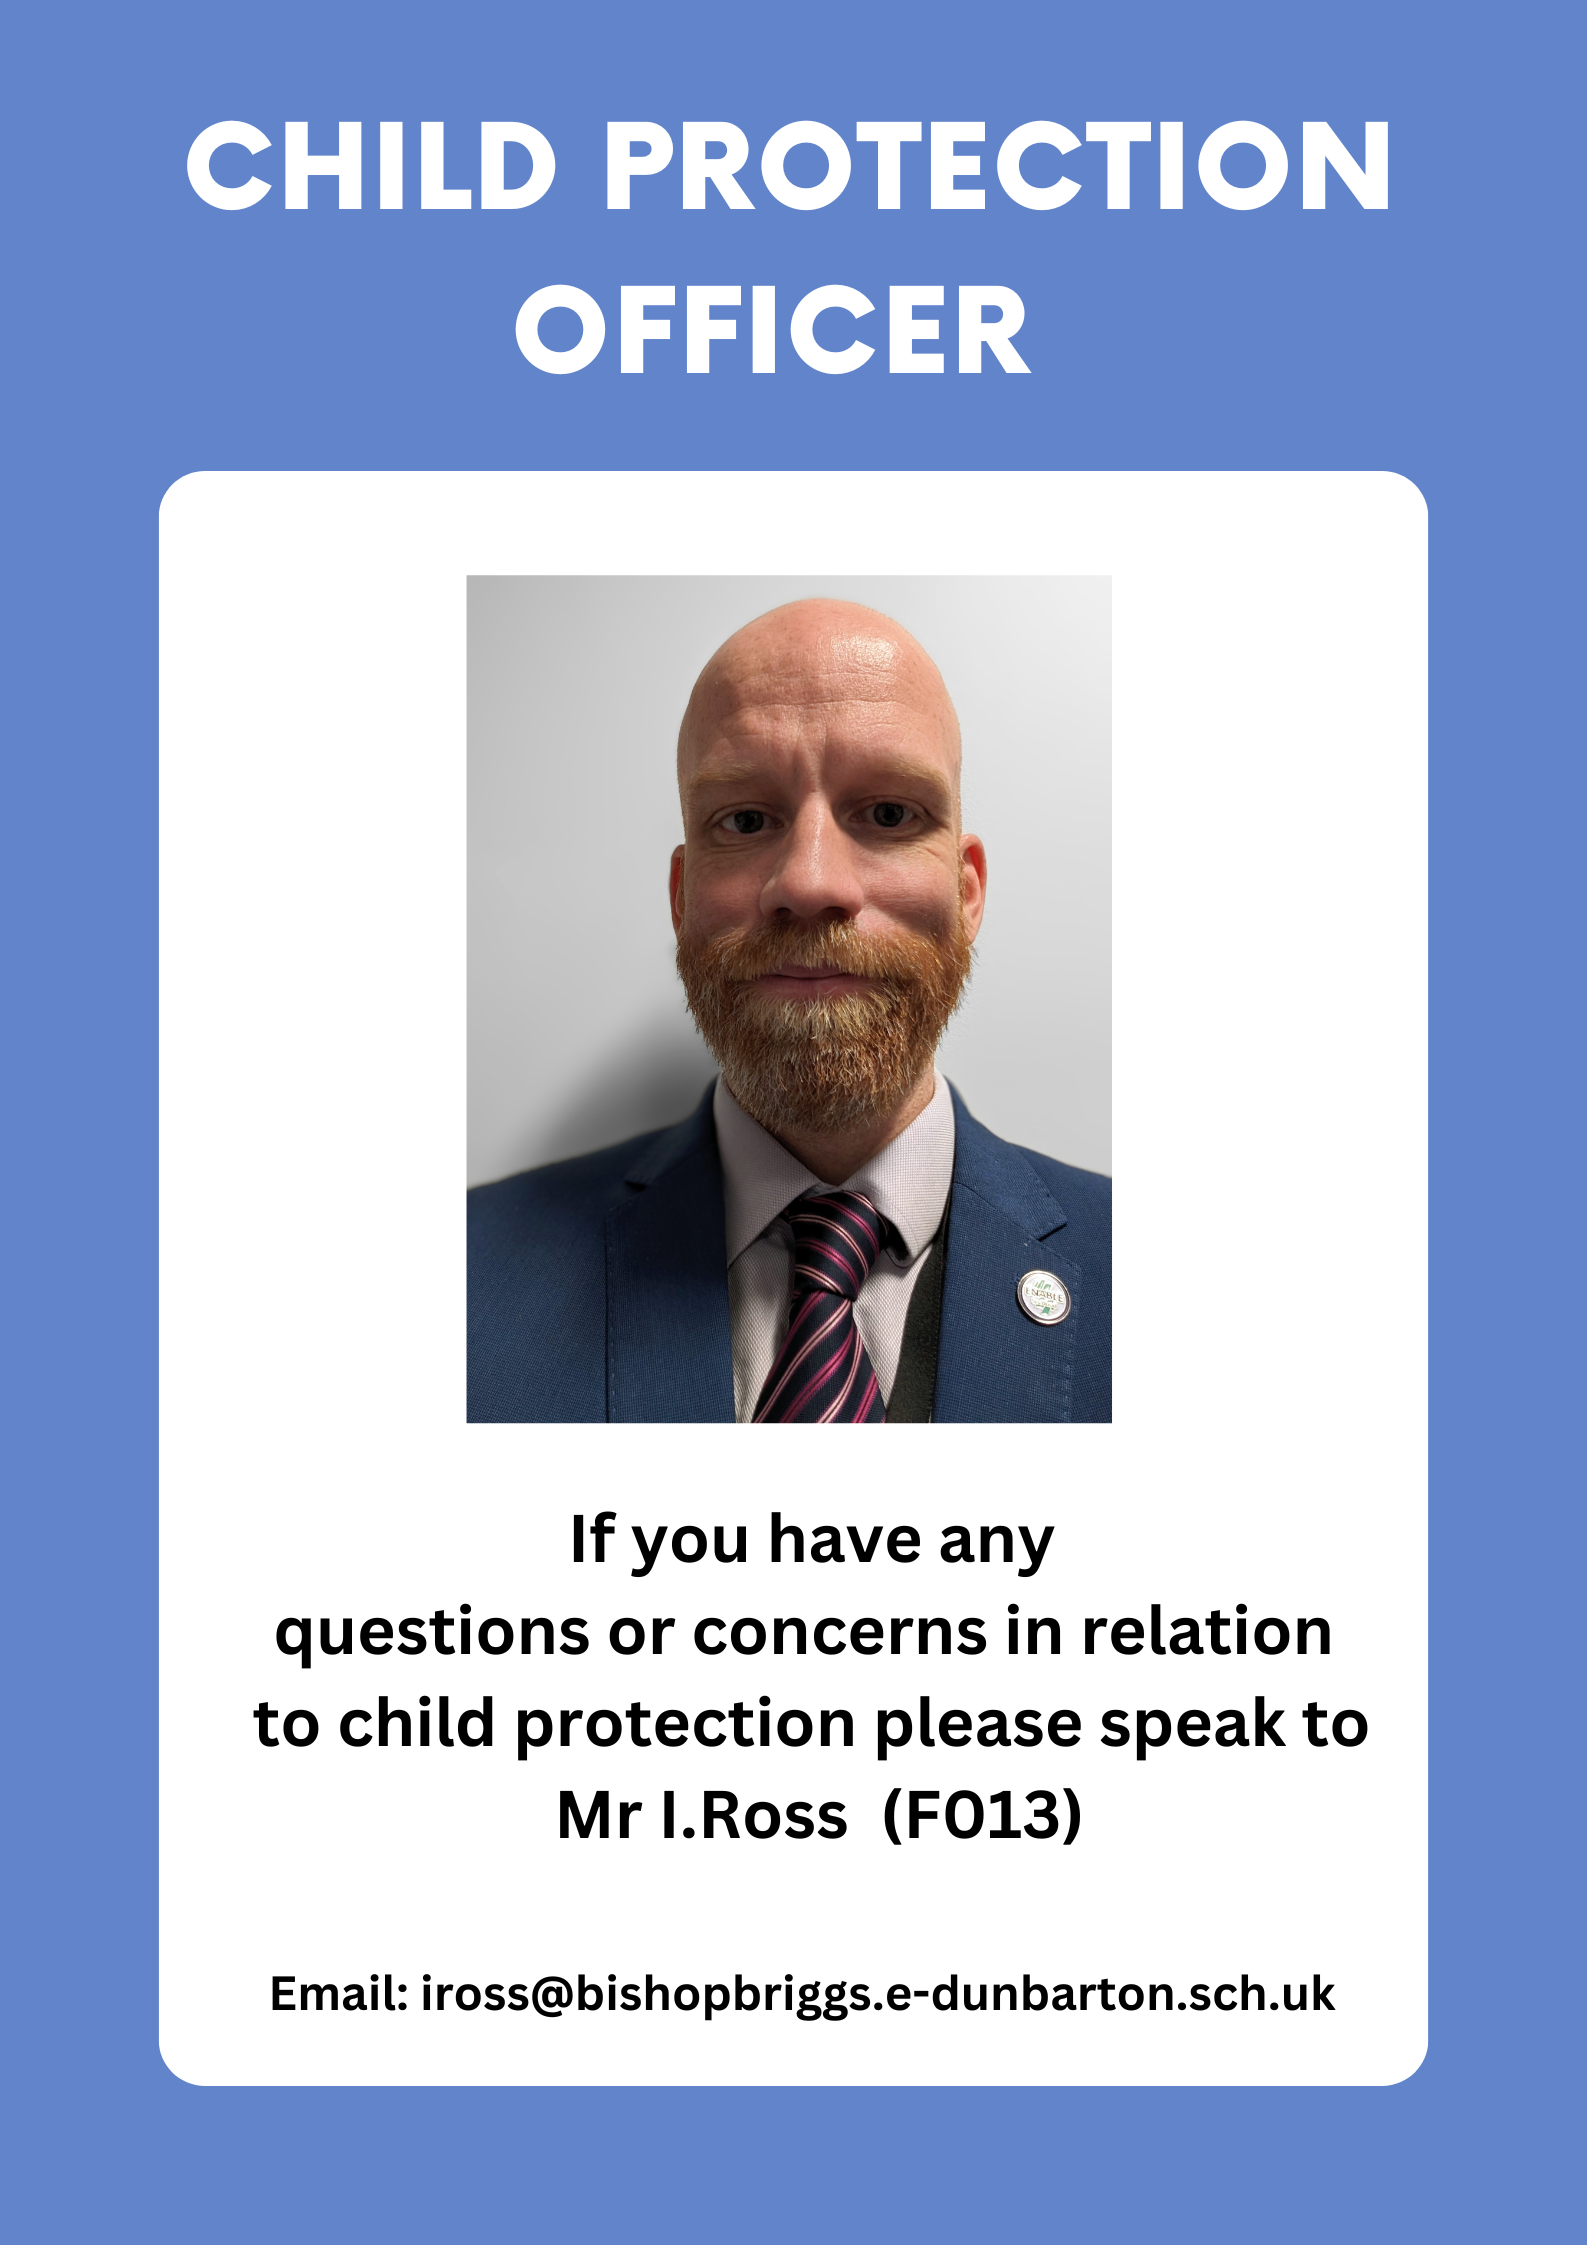 CHILD PROTECTION OFFICER NABLE If you have any questions or concerns in relation to child protection please speak to Mr I.Ross (F013) Email: iross@bishopbriggs.e-dunbarton.sch.uk